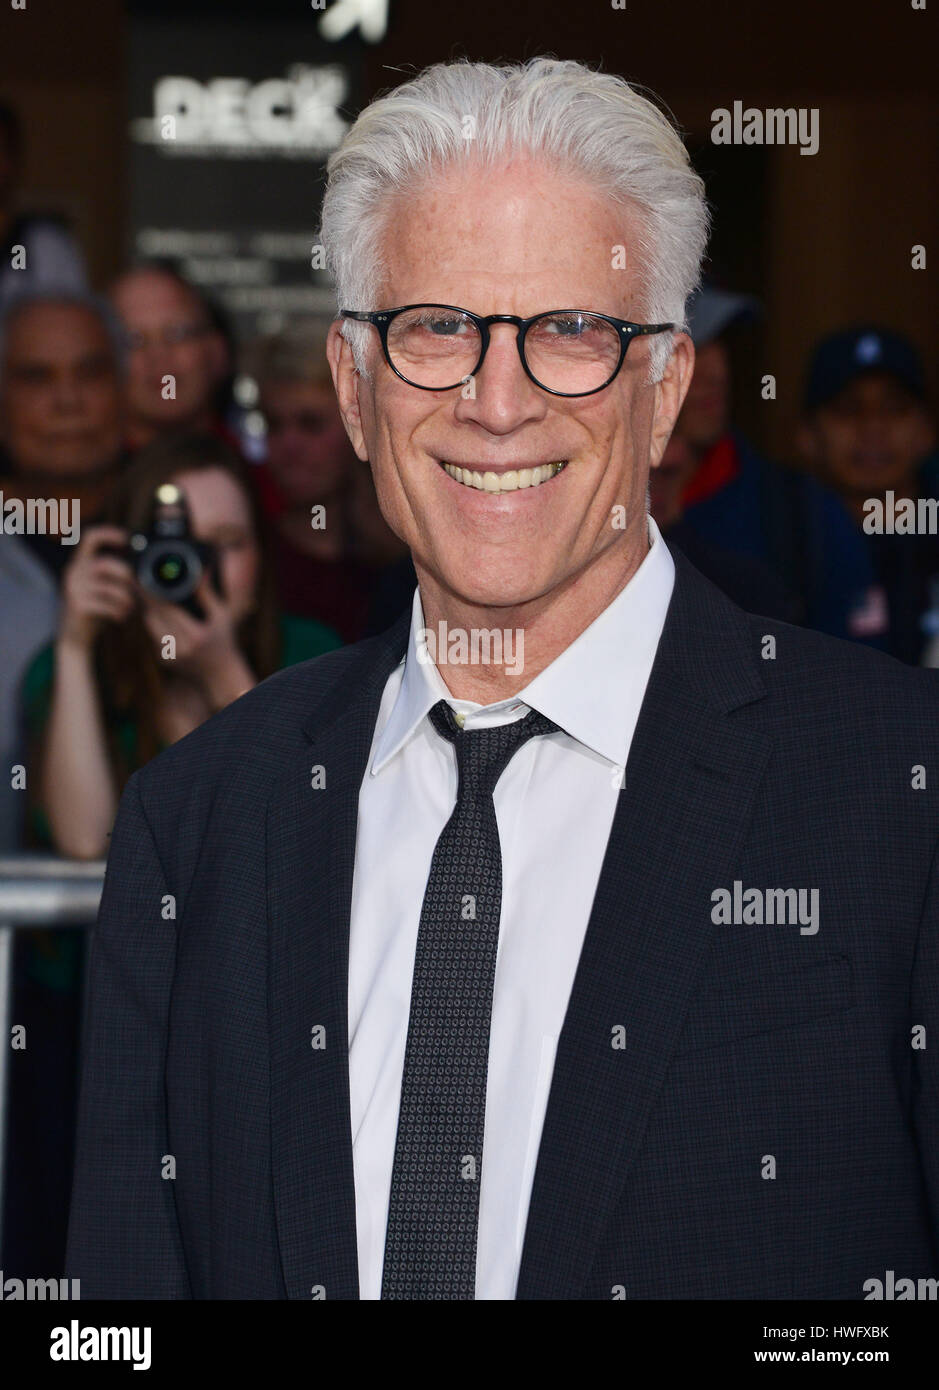 Los Angeles, USA. 20th Mar, 2017. Ted Danson 060 arriving at the CHIPS Premiere at the TCL Chinese Theatre in Los Angeles. March 20, 2017. Credit: Tsuni/USA/Alamy Live News Stock Photo